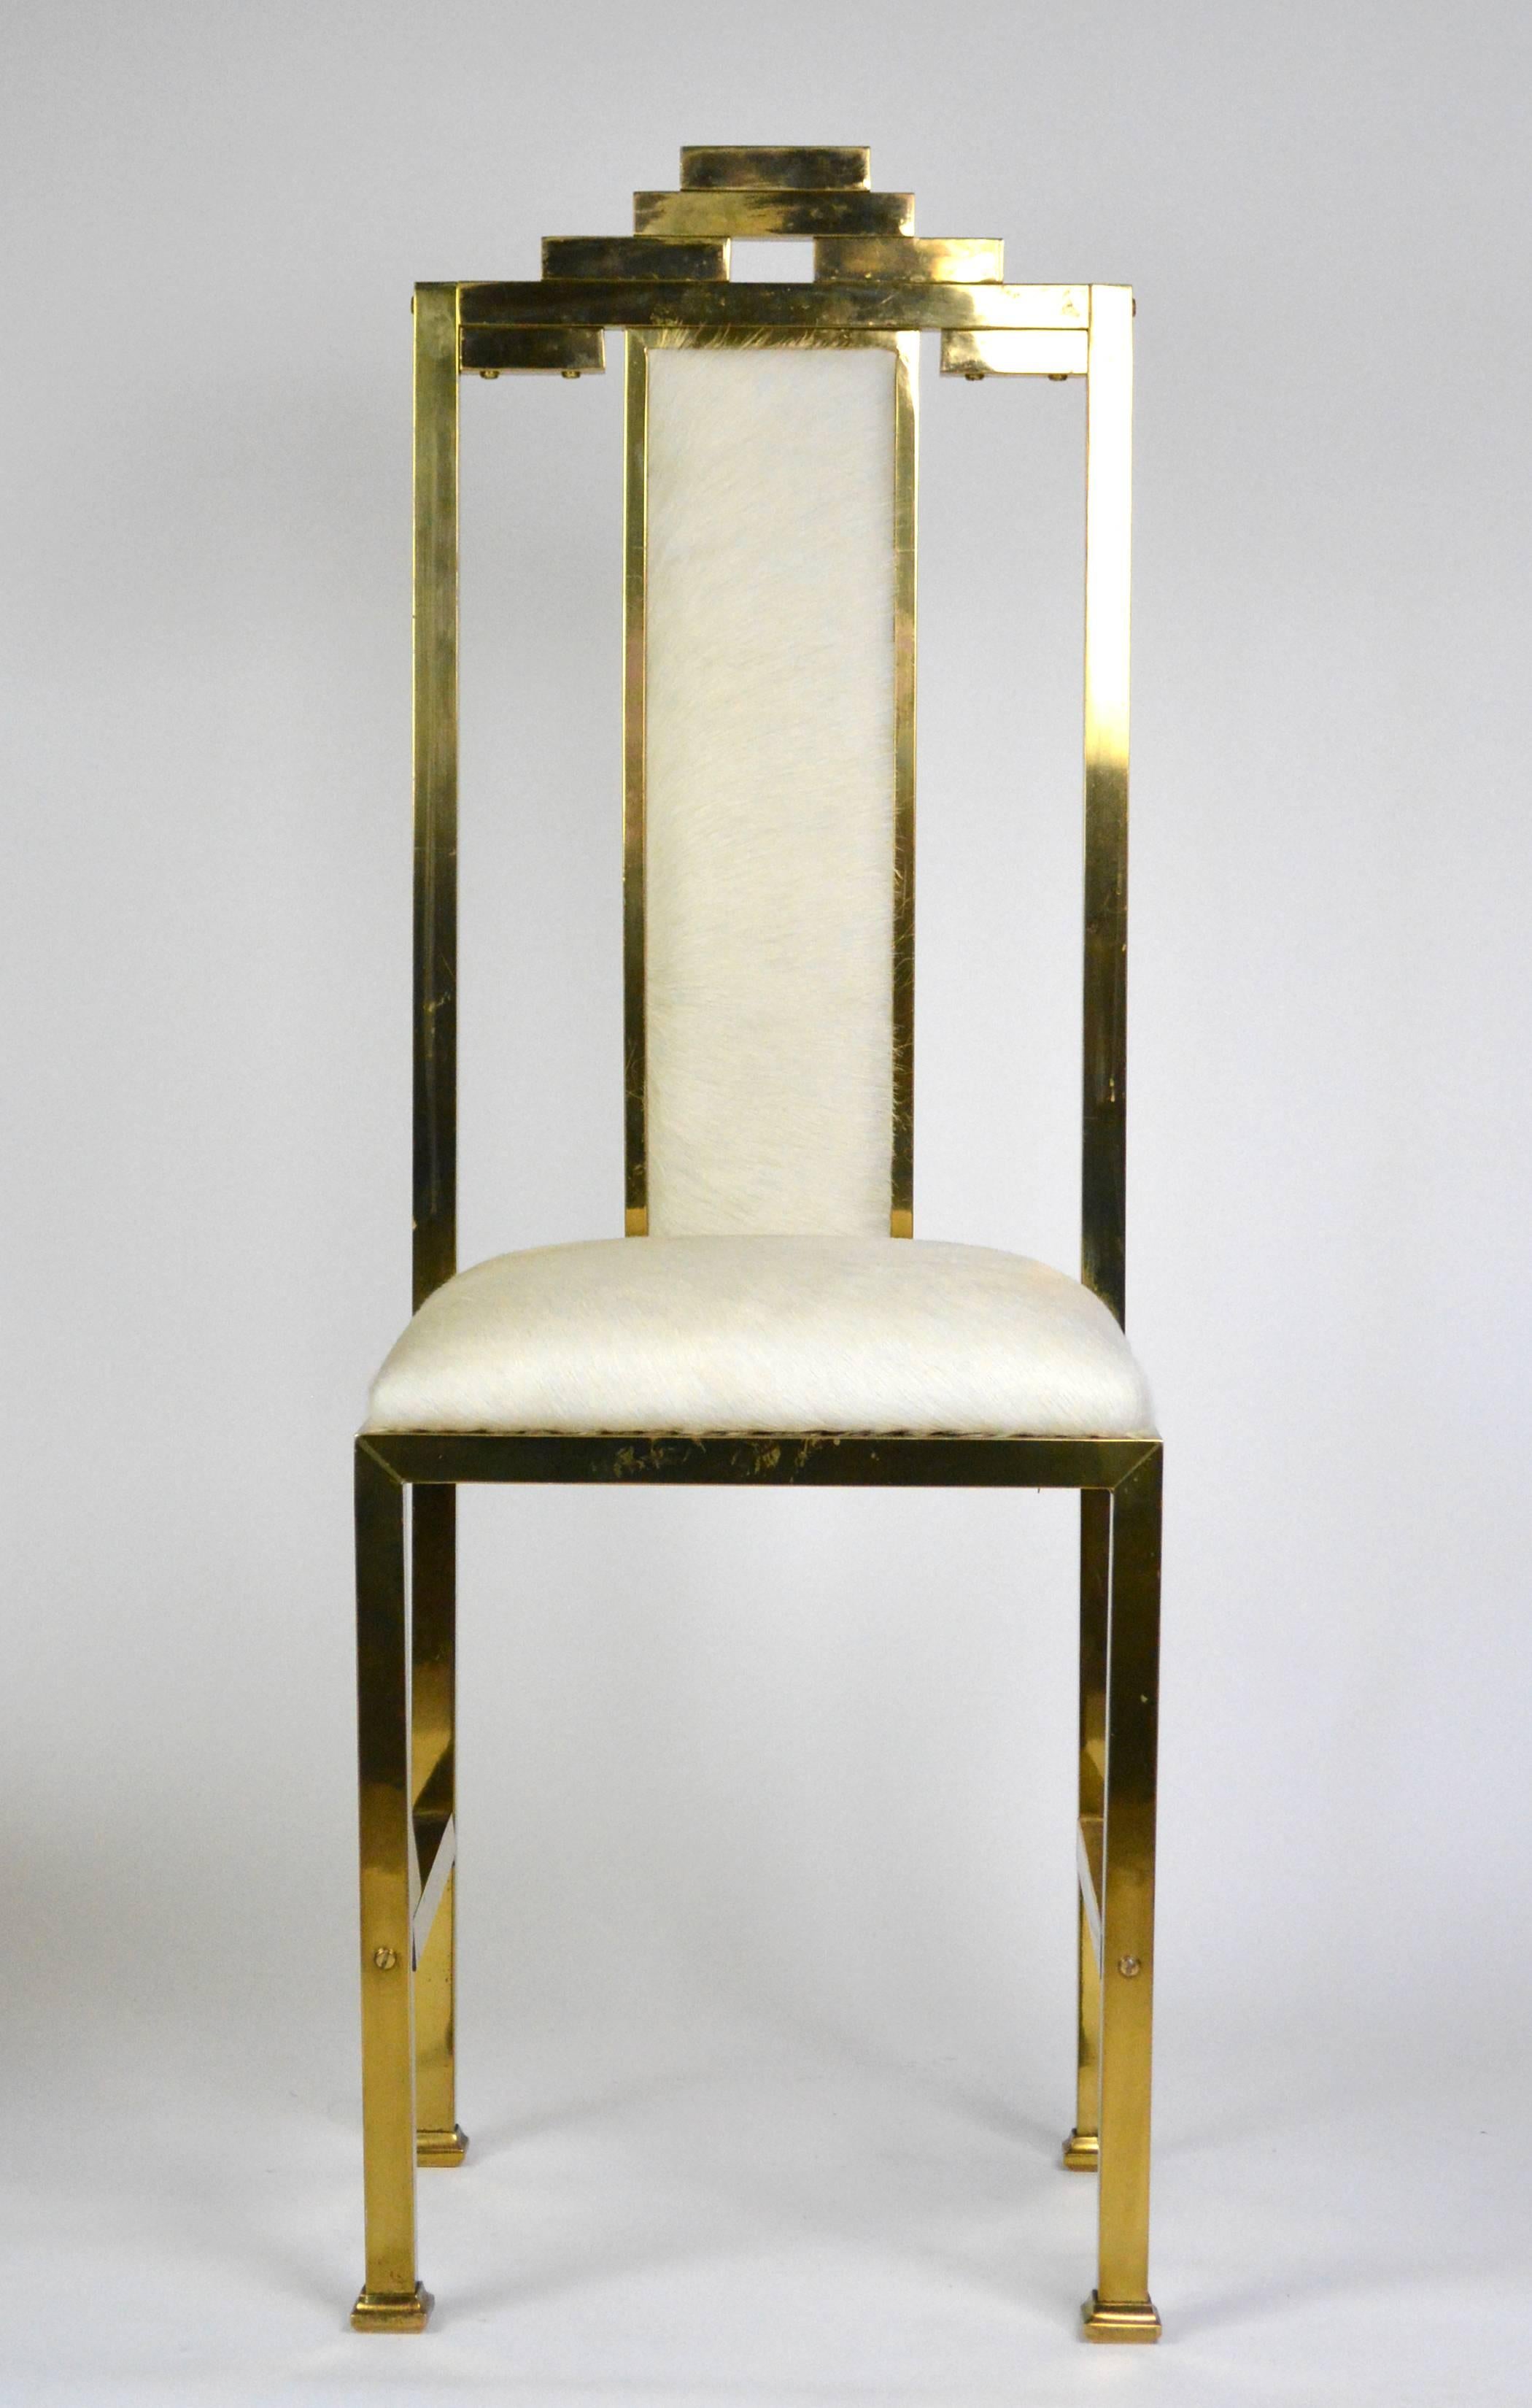 Four skyscraper style brass chairs with new hair-on-hide upholstery. Circa 1970's, with an Art Deco, Hollywood Regency feel.